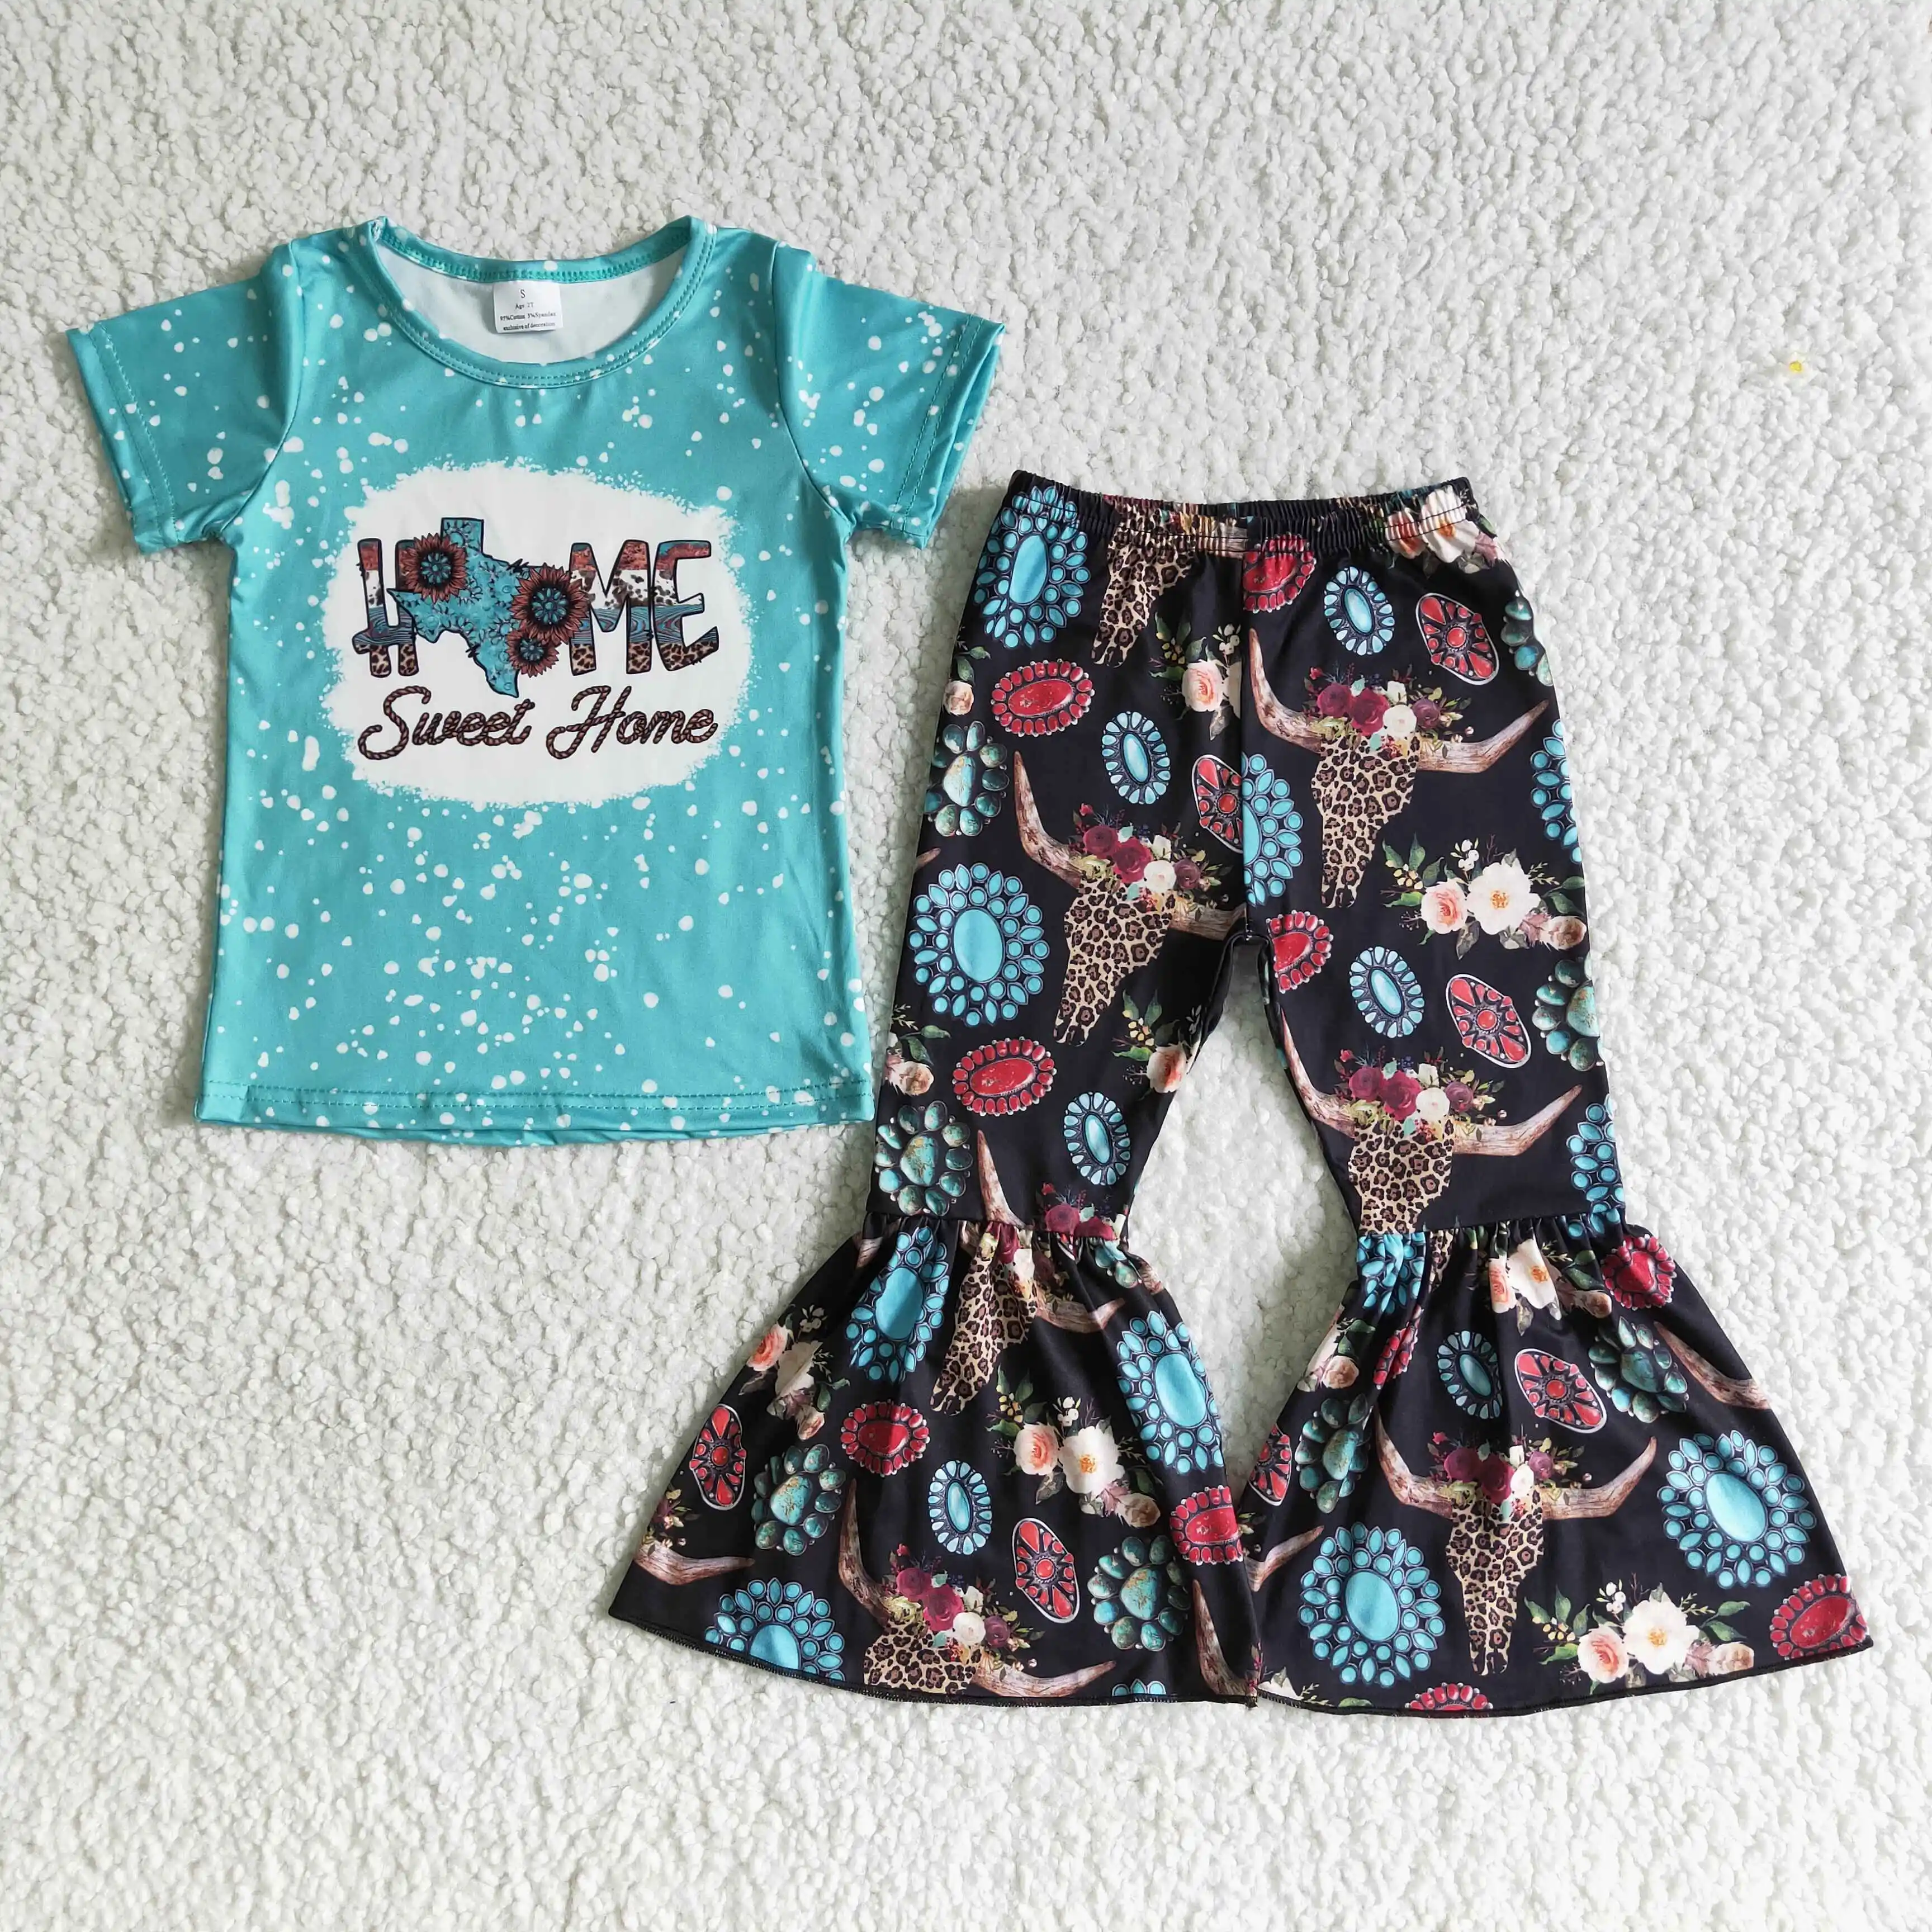 Sweet home western baby girl's turquoise bull head bell bottom outfits